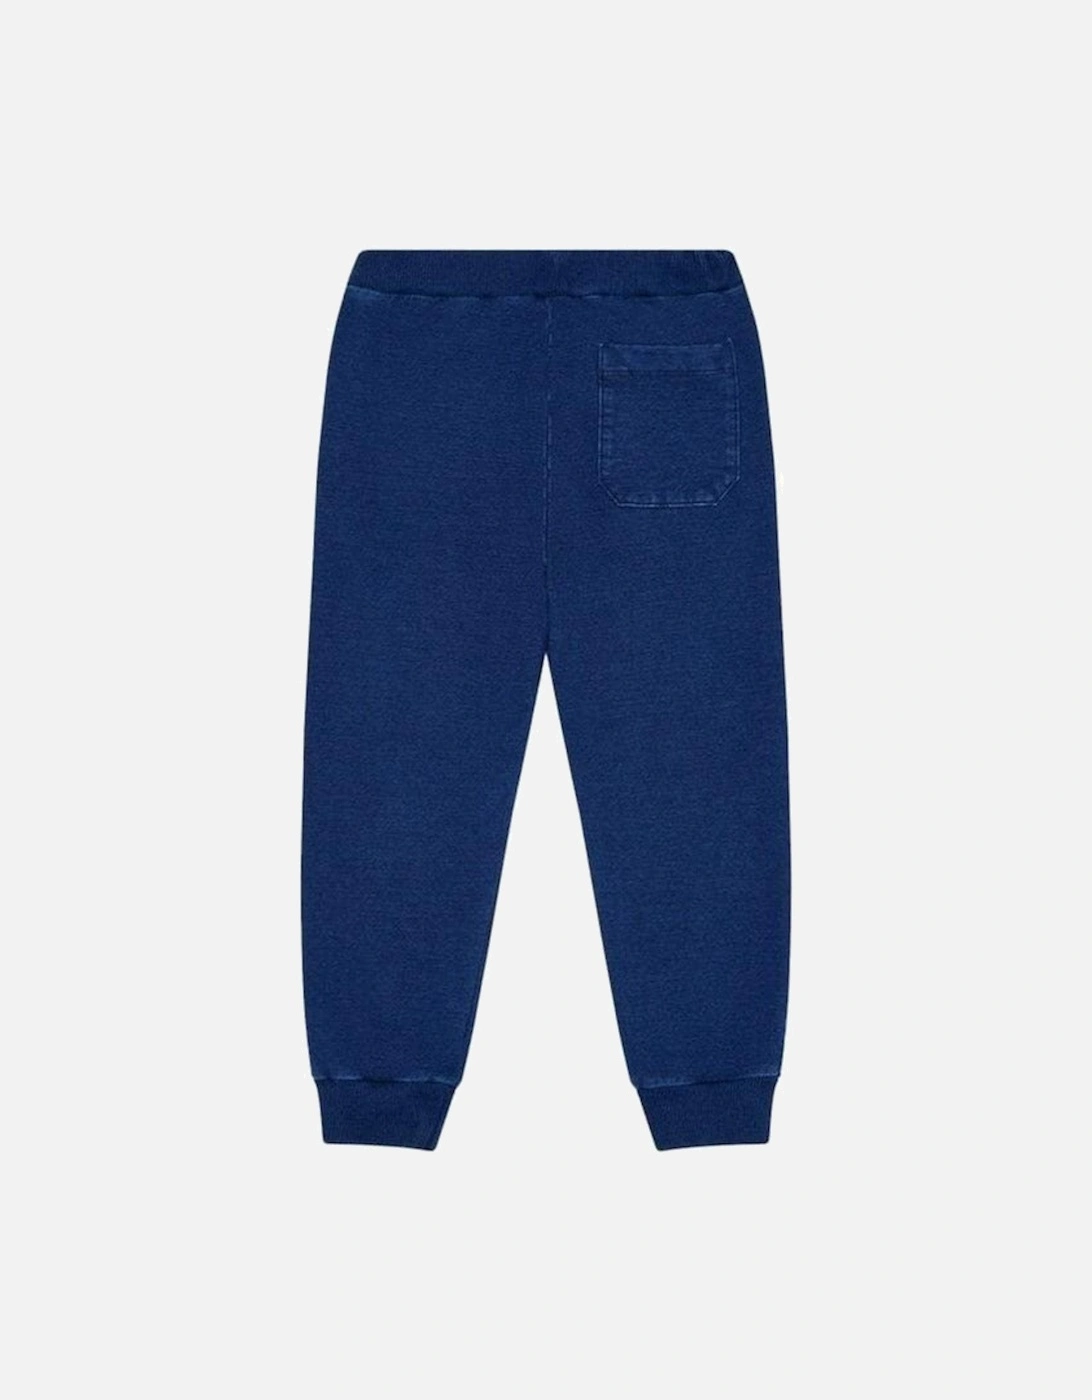 Boys Embroidered Joggers Blue